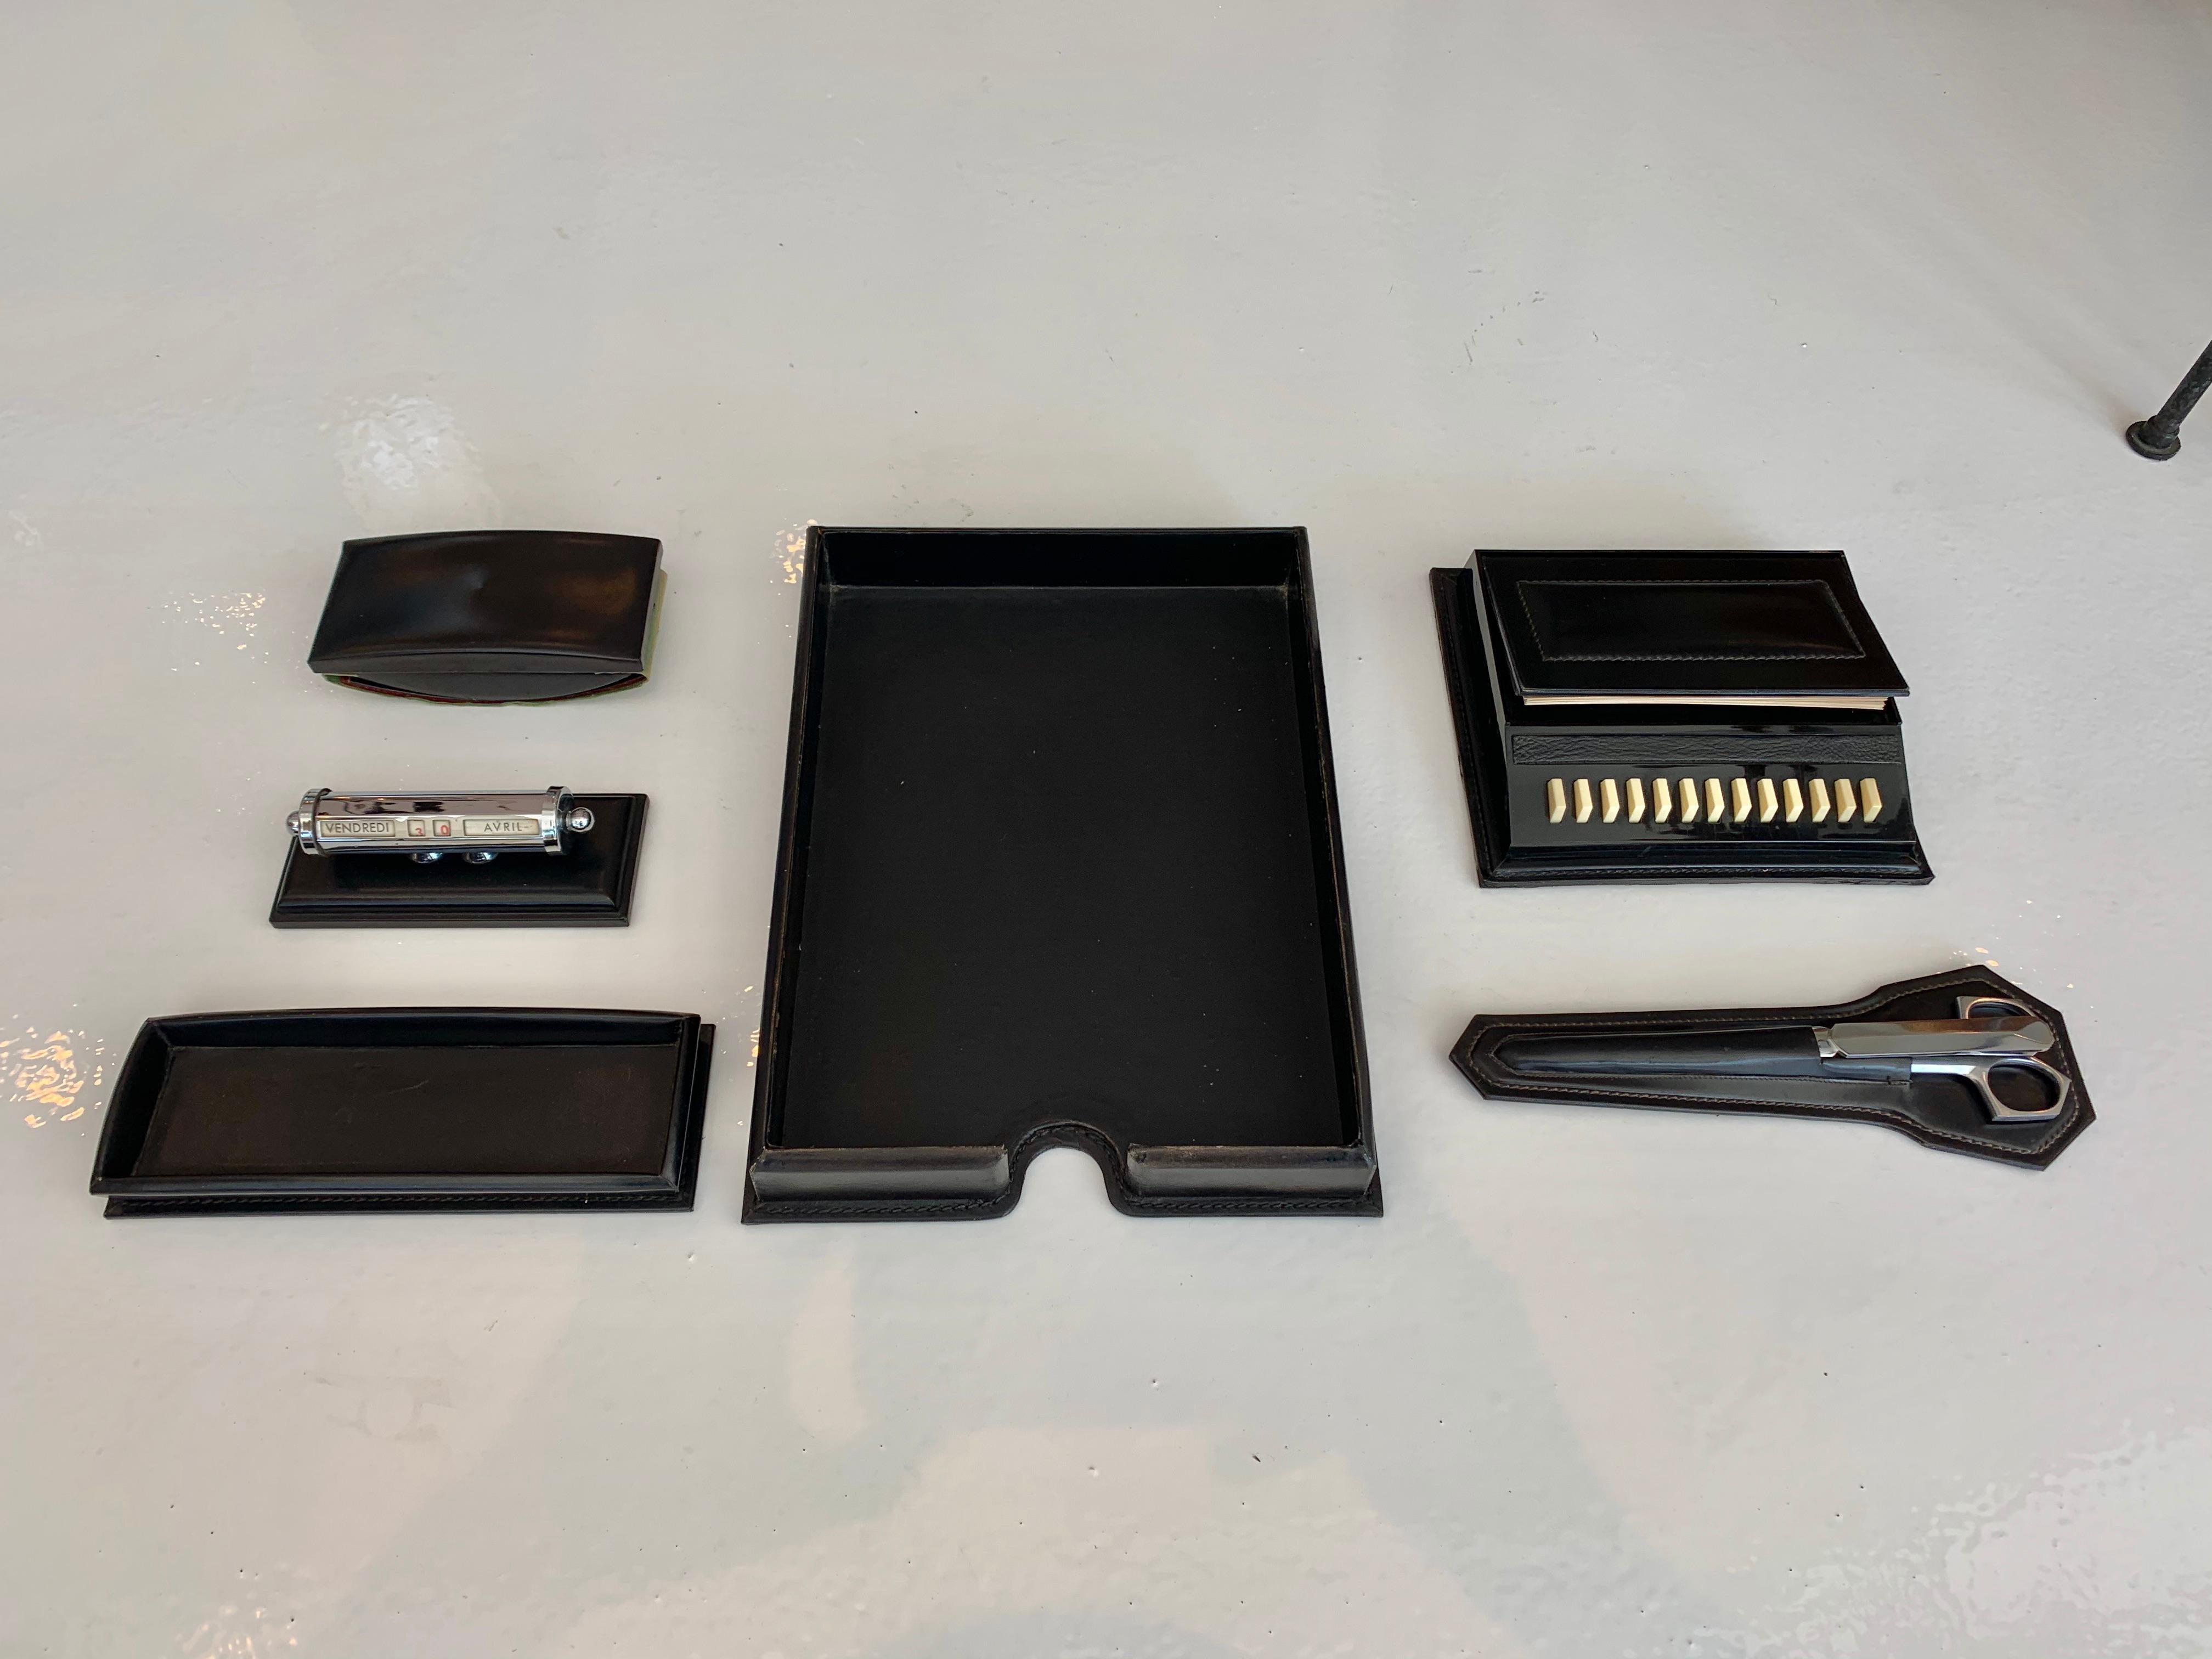 Fantastic 6 piece French leather desk set by Le Tanneur. All pieces wrapped in black leather with white contrast stitching. Desk set features a paper holder, pen holder, ink blotter, adjustable calendar, chrome scissors and letter opener and manual